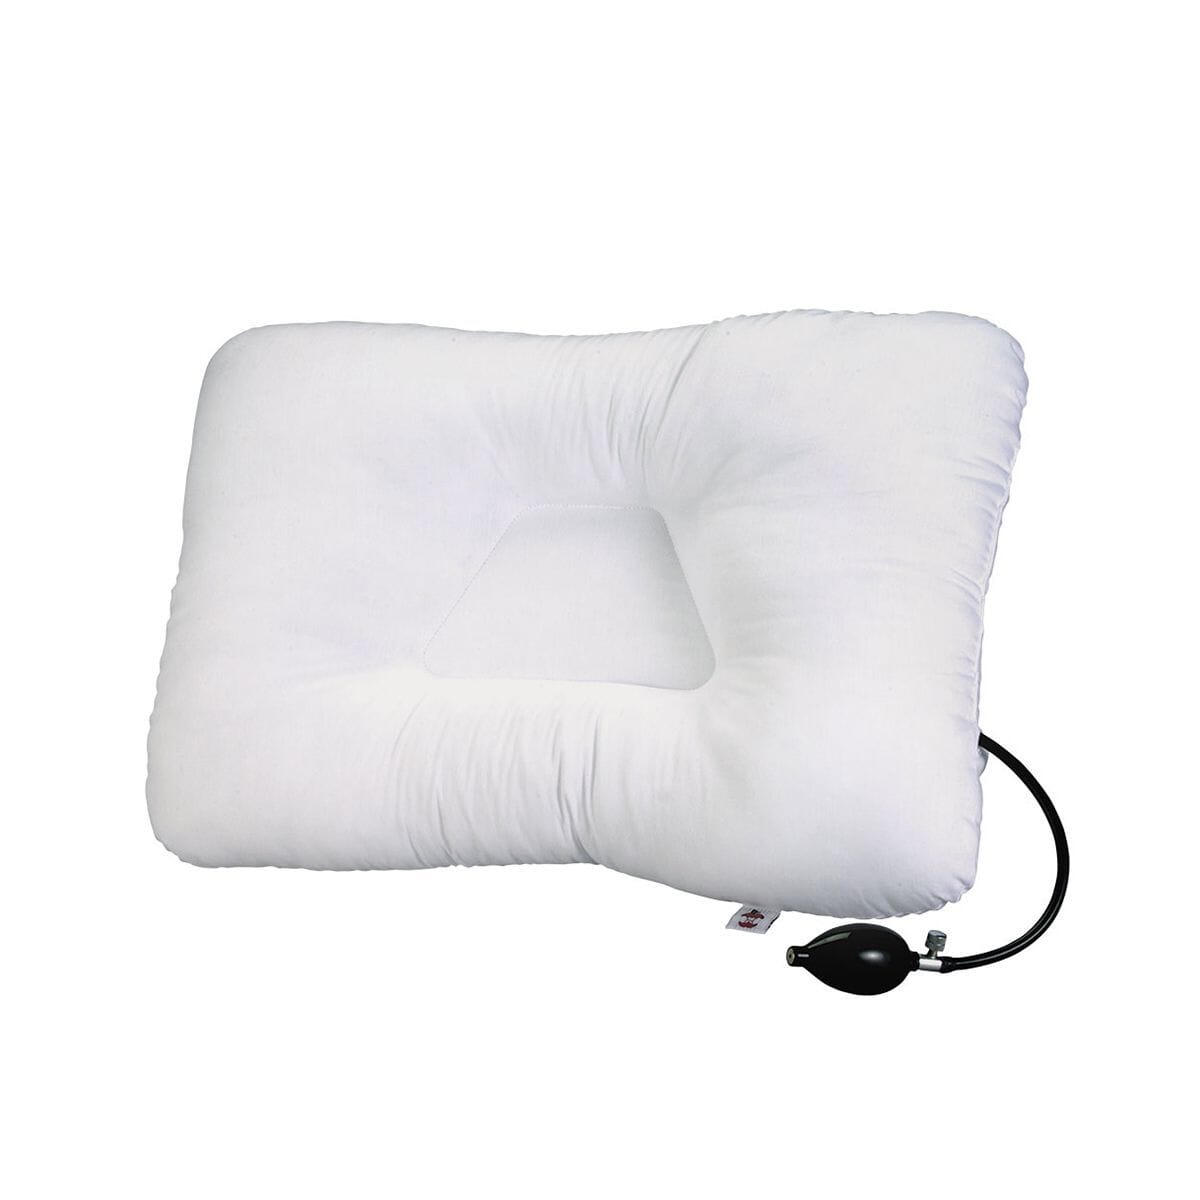 View AirCore Adjustable Pillow information